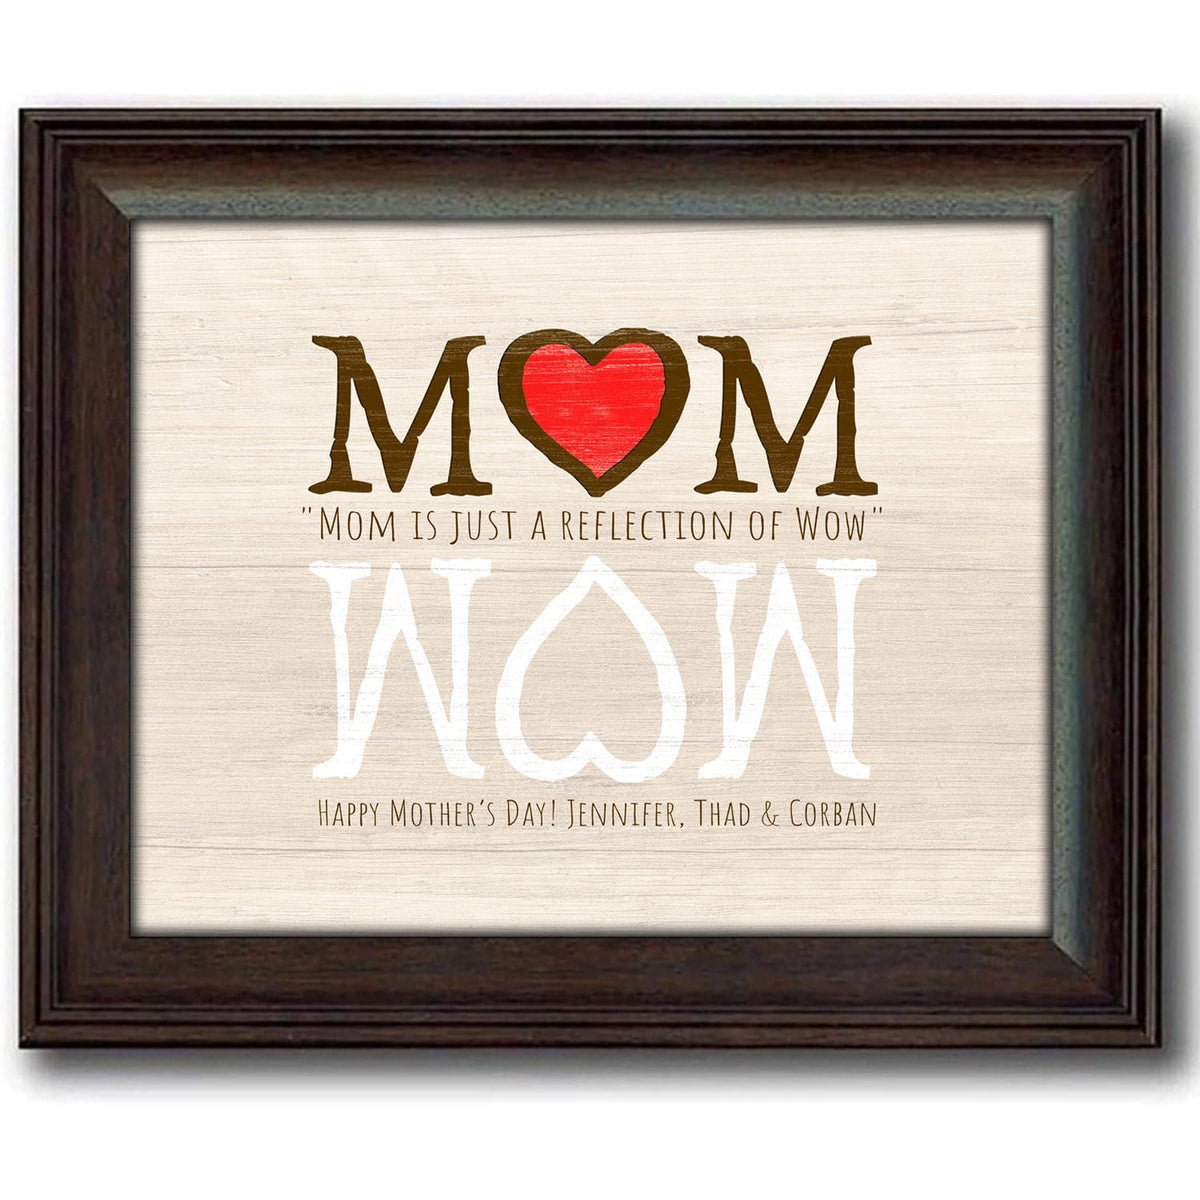 Mom reflection of Wow personalized gift